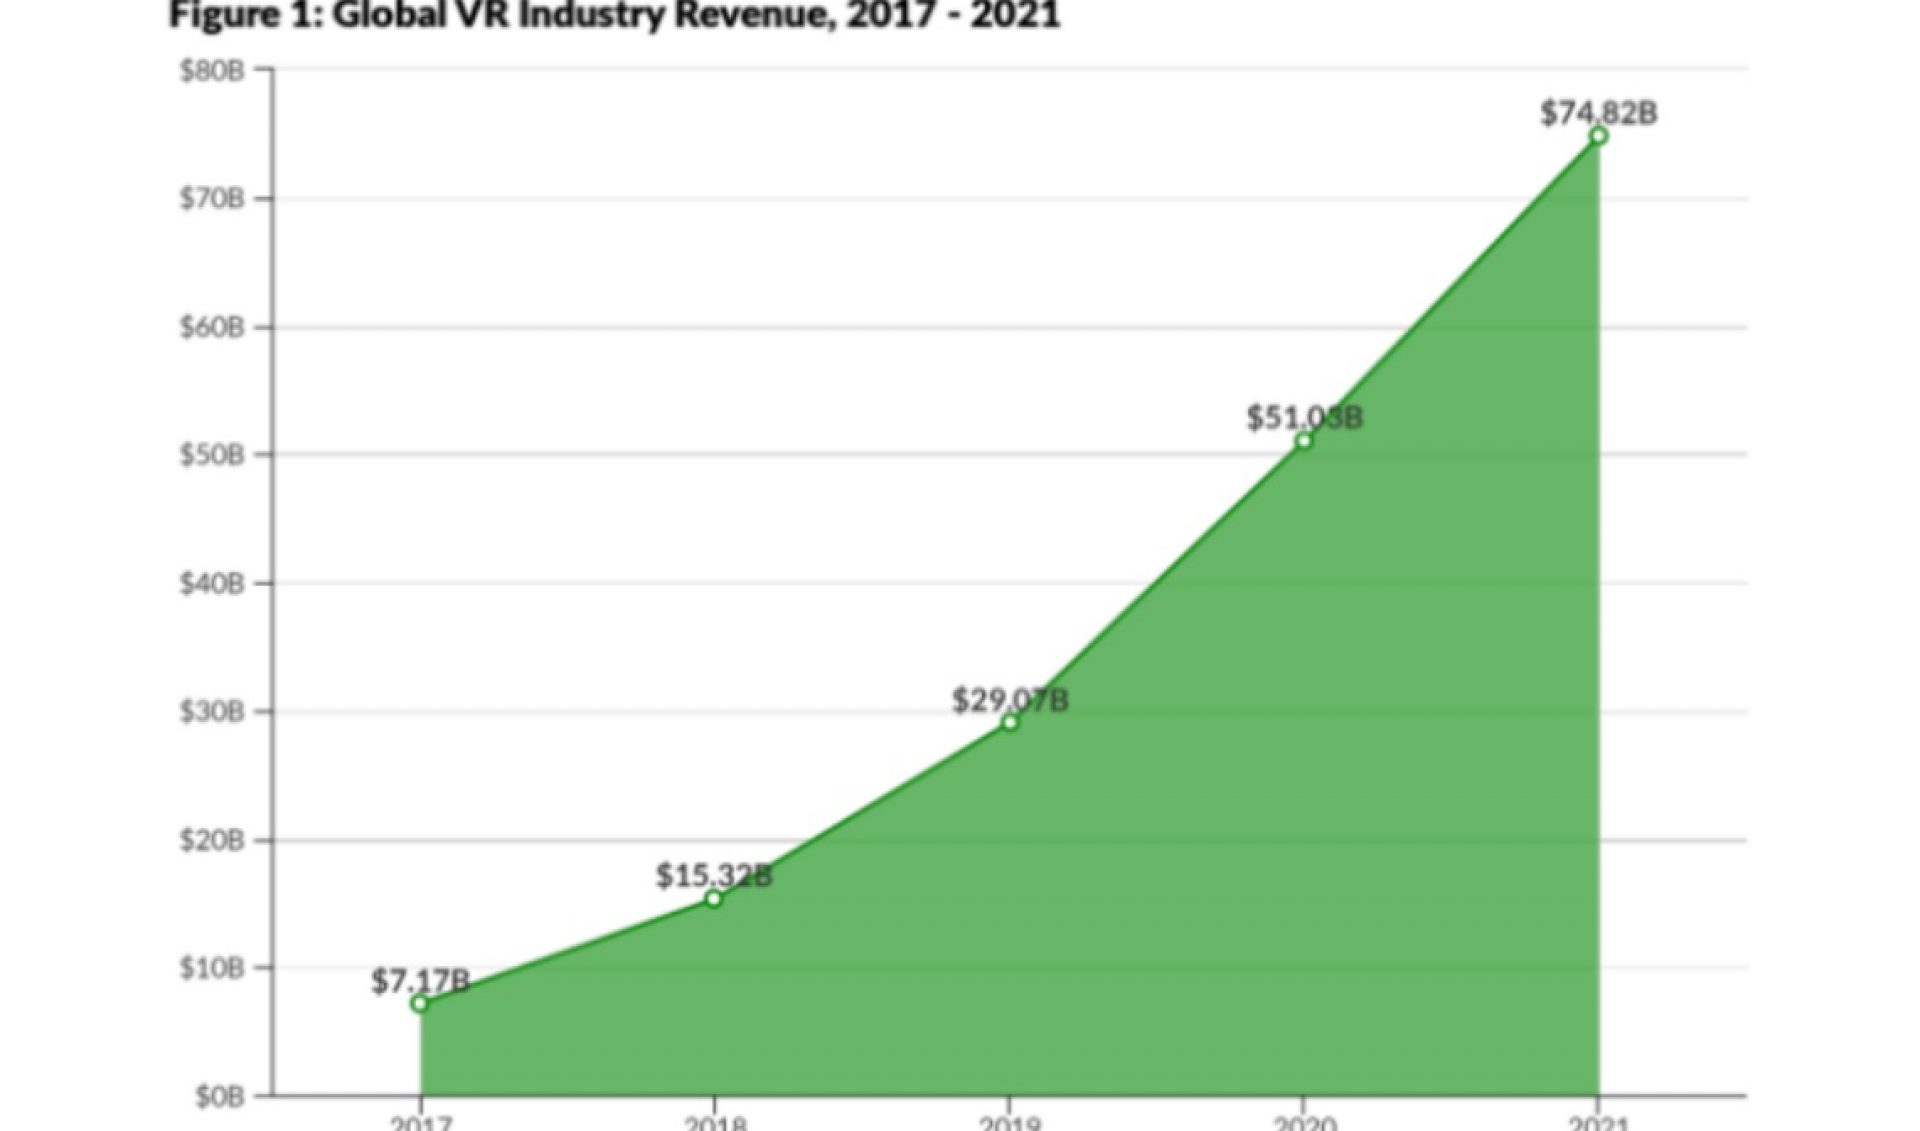 VR Industry Expected To Approach $75 Billion In Revenue By 2021